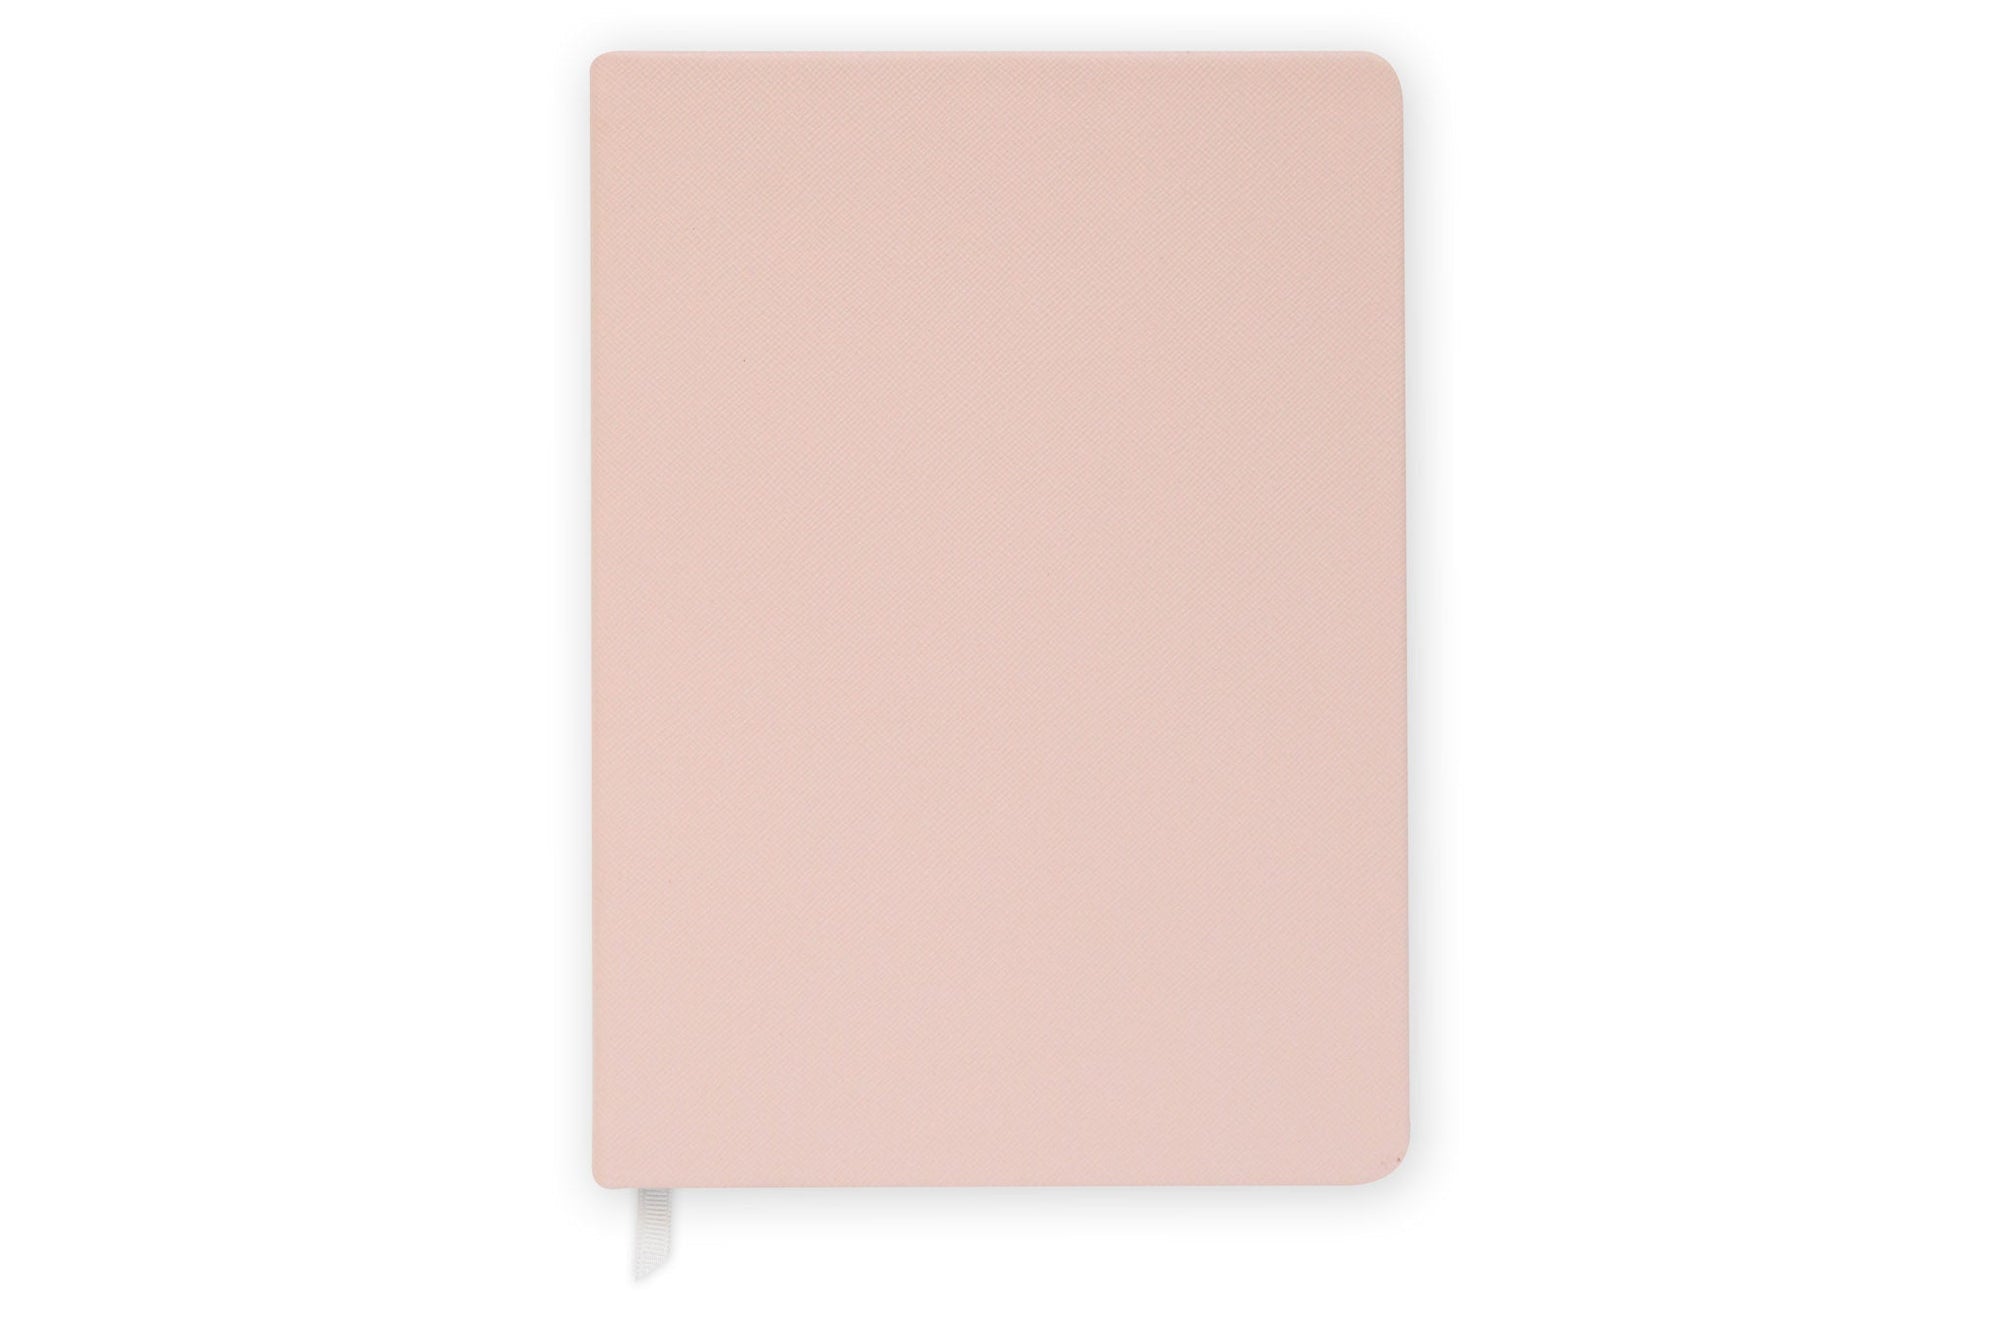 Vegan Leather Notebook, Blush - Chapters